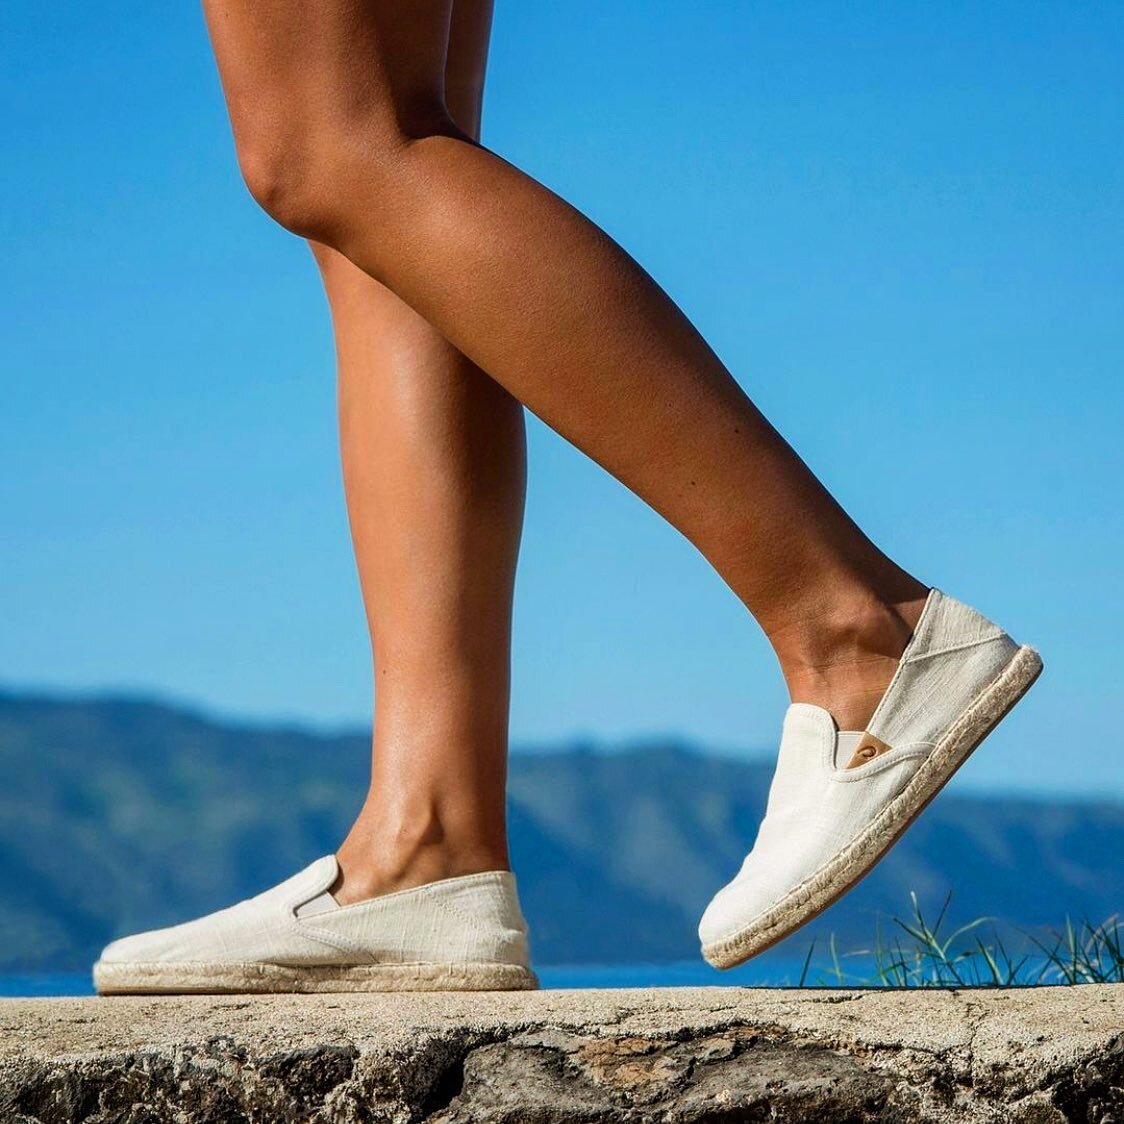 Hey Ladies!  Check out the new Espadrille from @olukai ....it makes the perfect shoe for that casual outing!  Check us out at www.globalgifting.com for more info! 
#olukai #espadrille #gift #gifting #giftexperience #virtualgifting #eventprofs #meetin